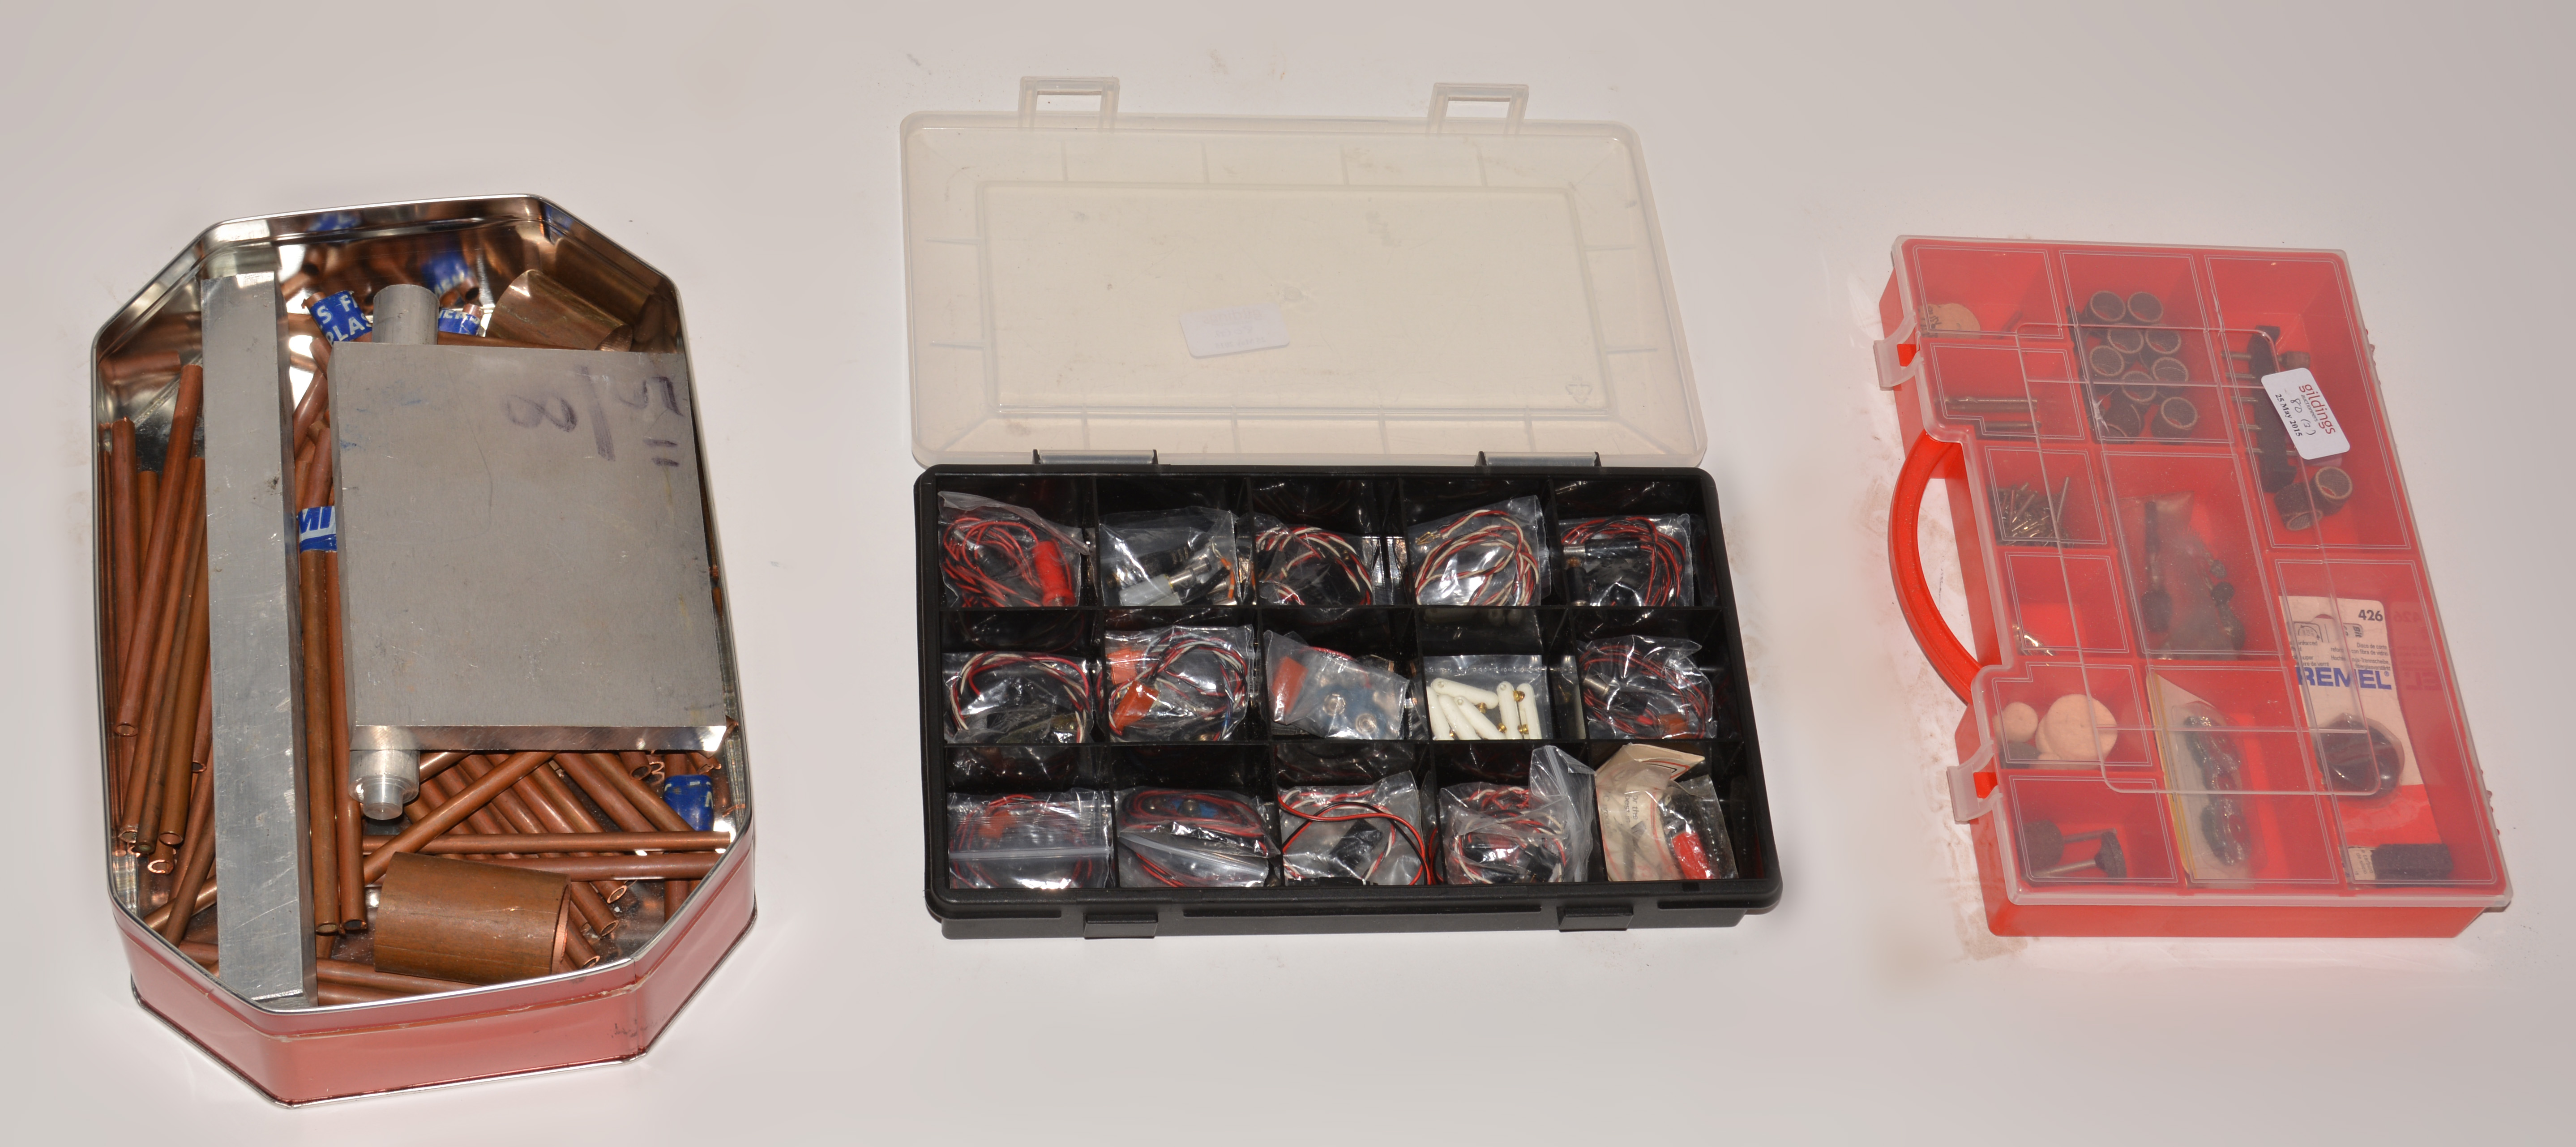 Three boxes Tin, containing copper and off cuts, plastic box with Dremel tool, box of R/C spares.